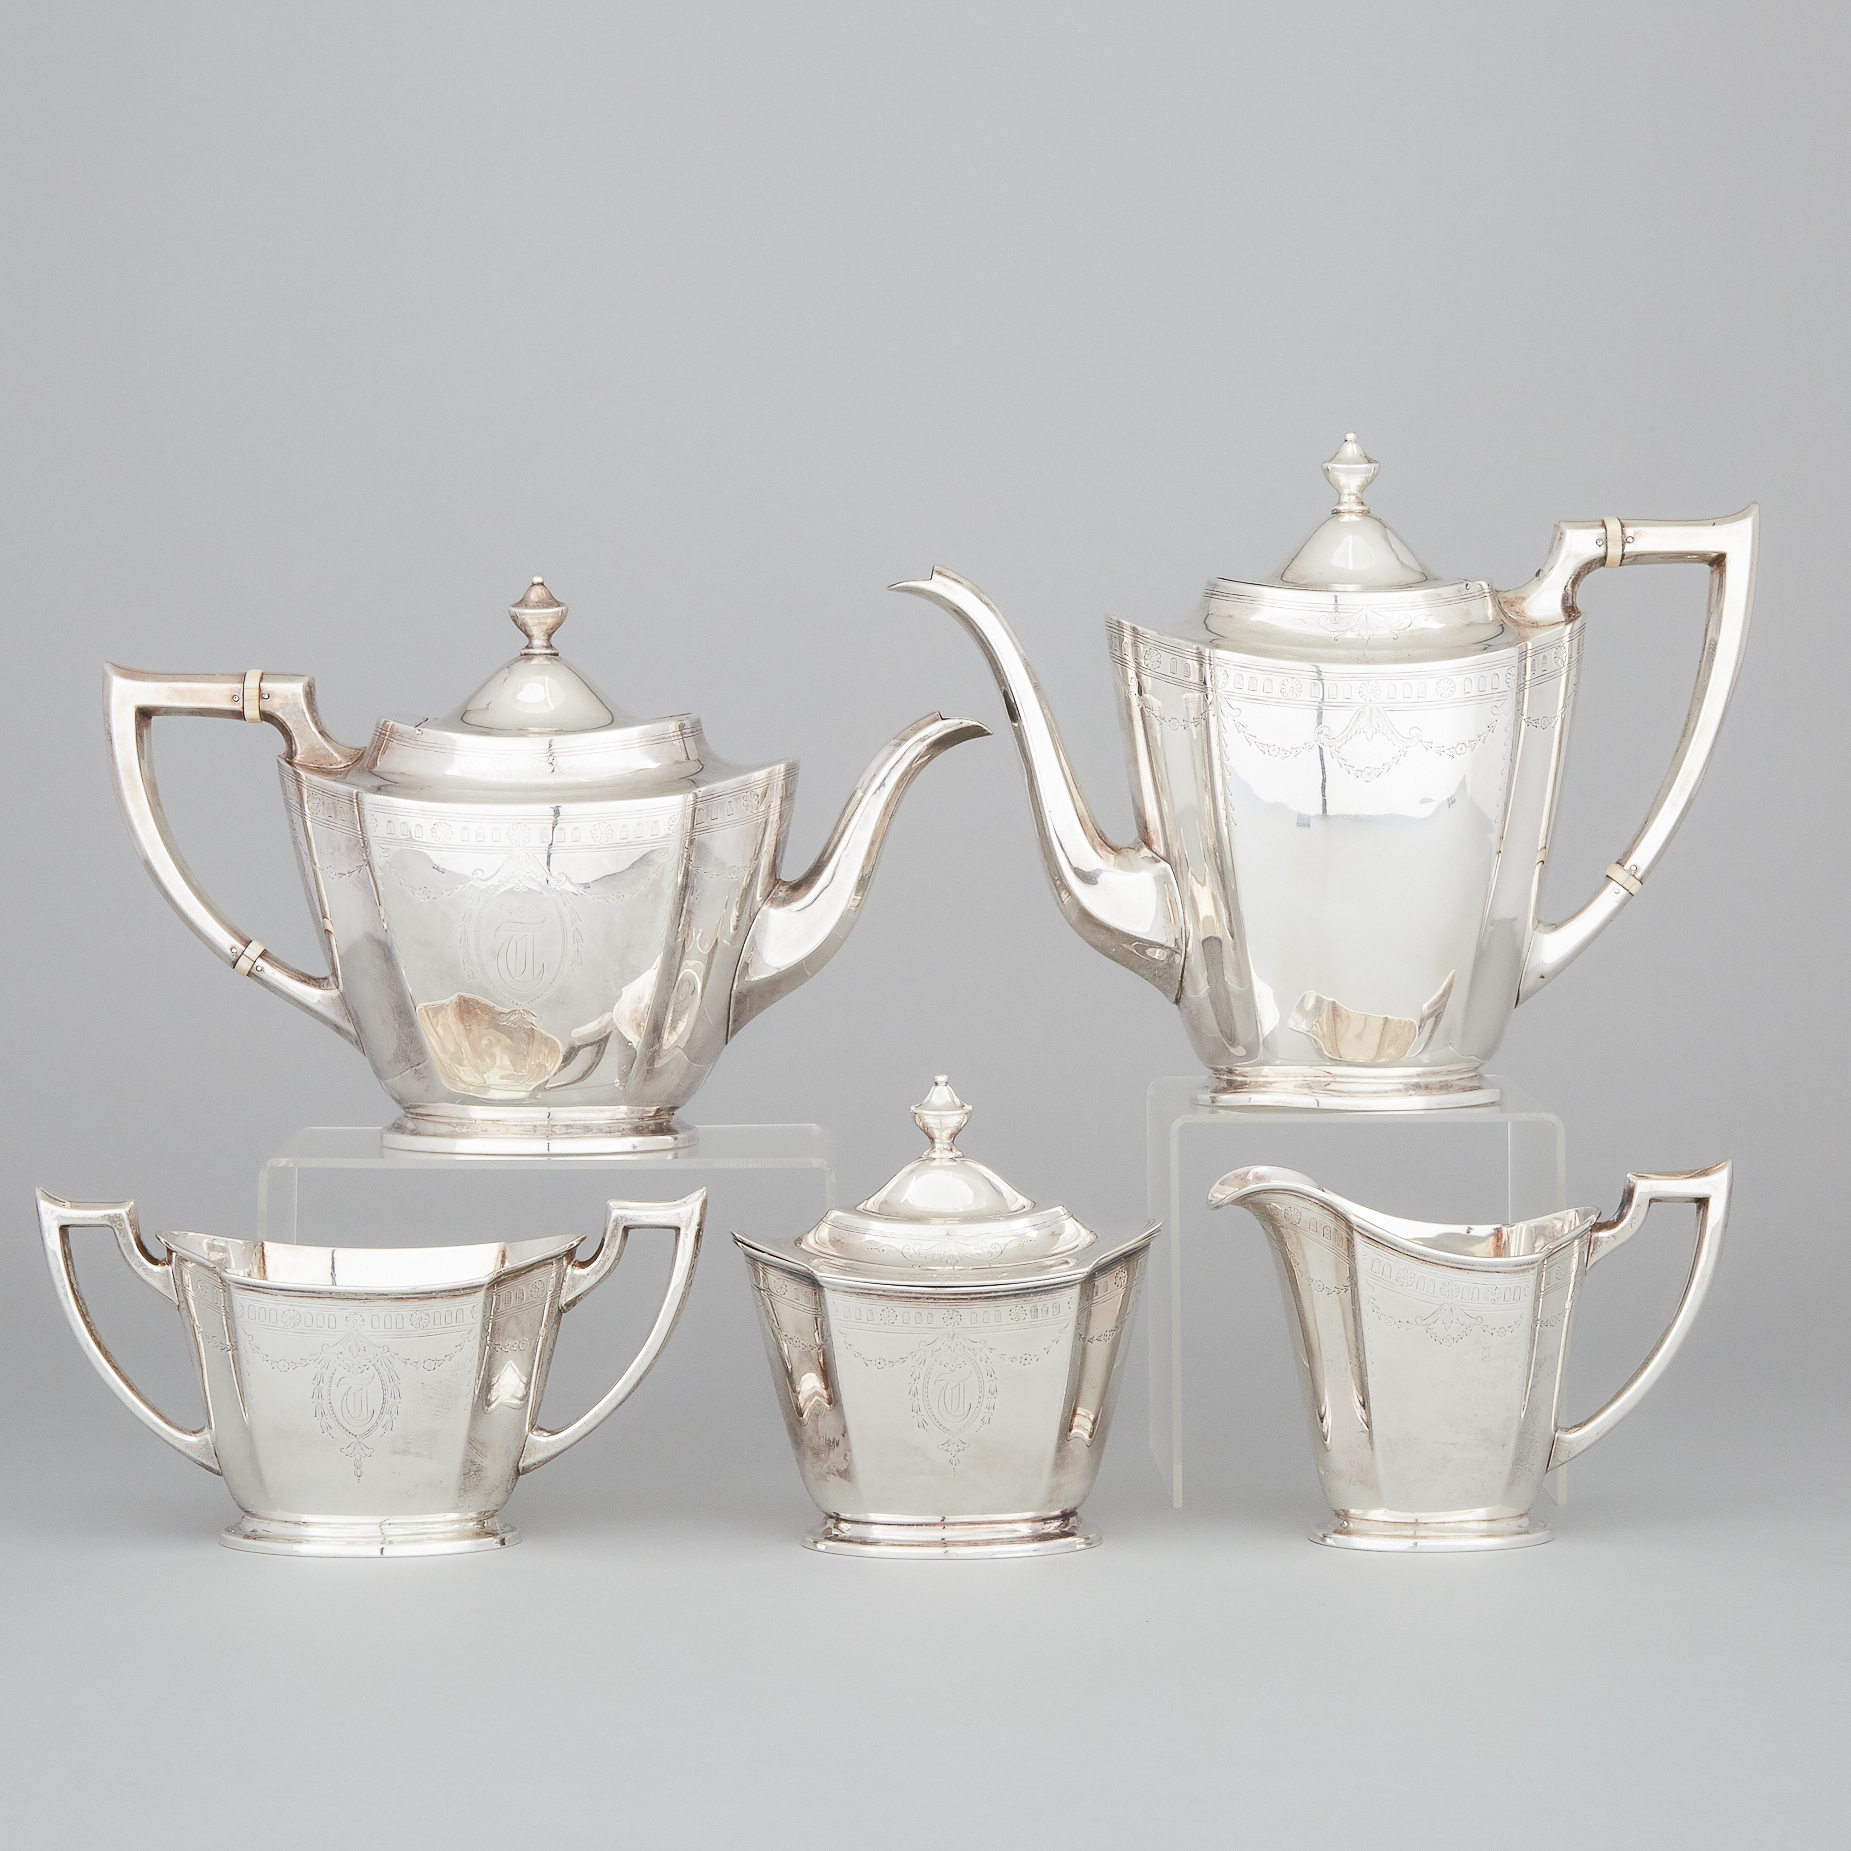 American Silver Tea and Coffee Service, International Silver Co., Meriden, Ct., early 20th century